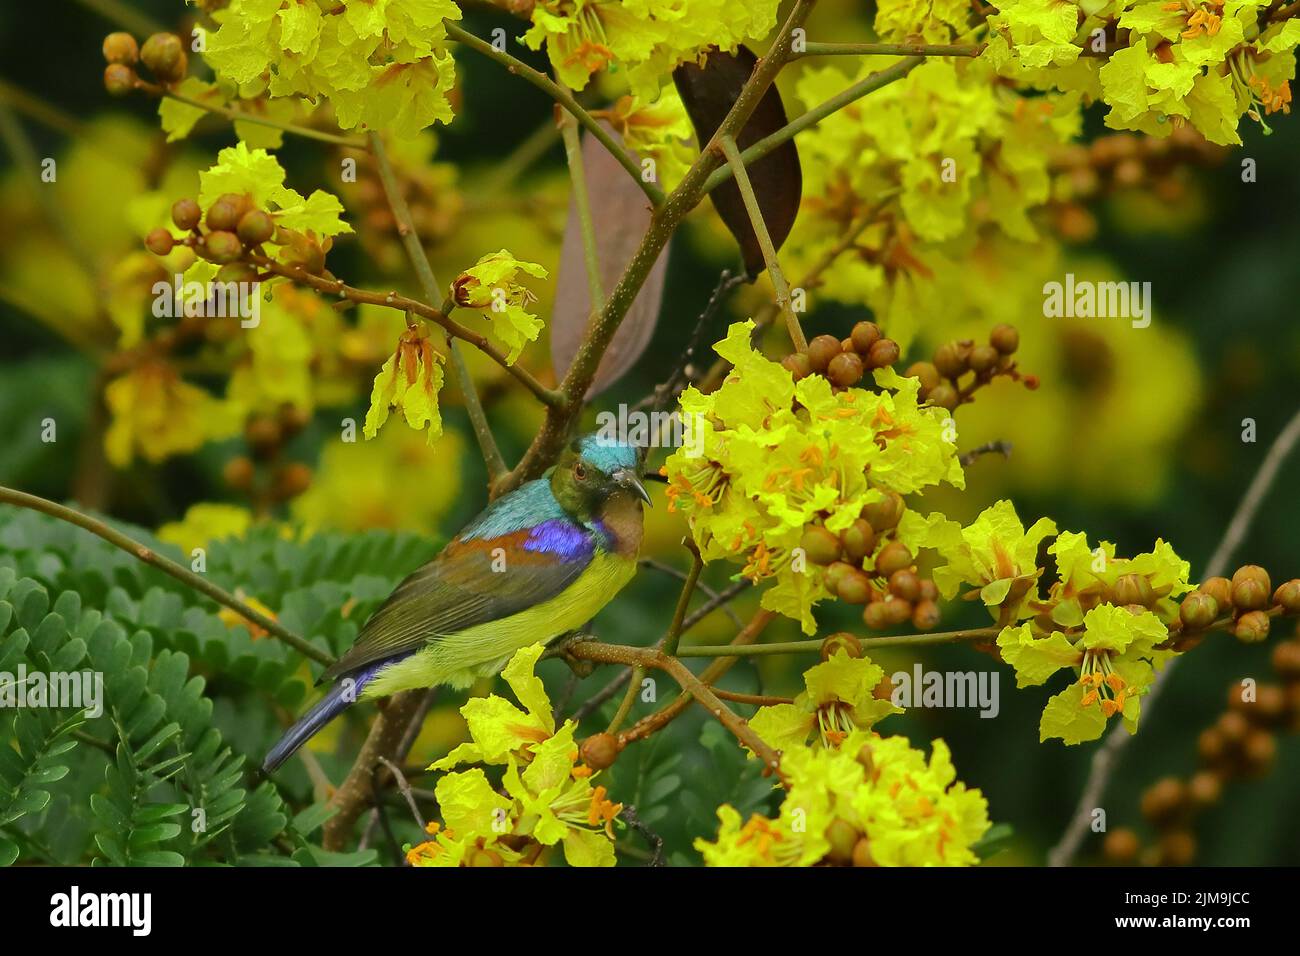 An Olive-backed sunbird perches amongst the yellow flowers of Yellow flametree in Malaysia. Stock Photo